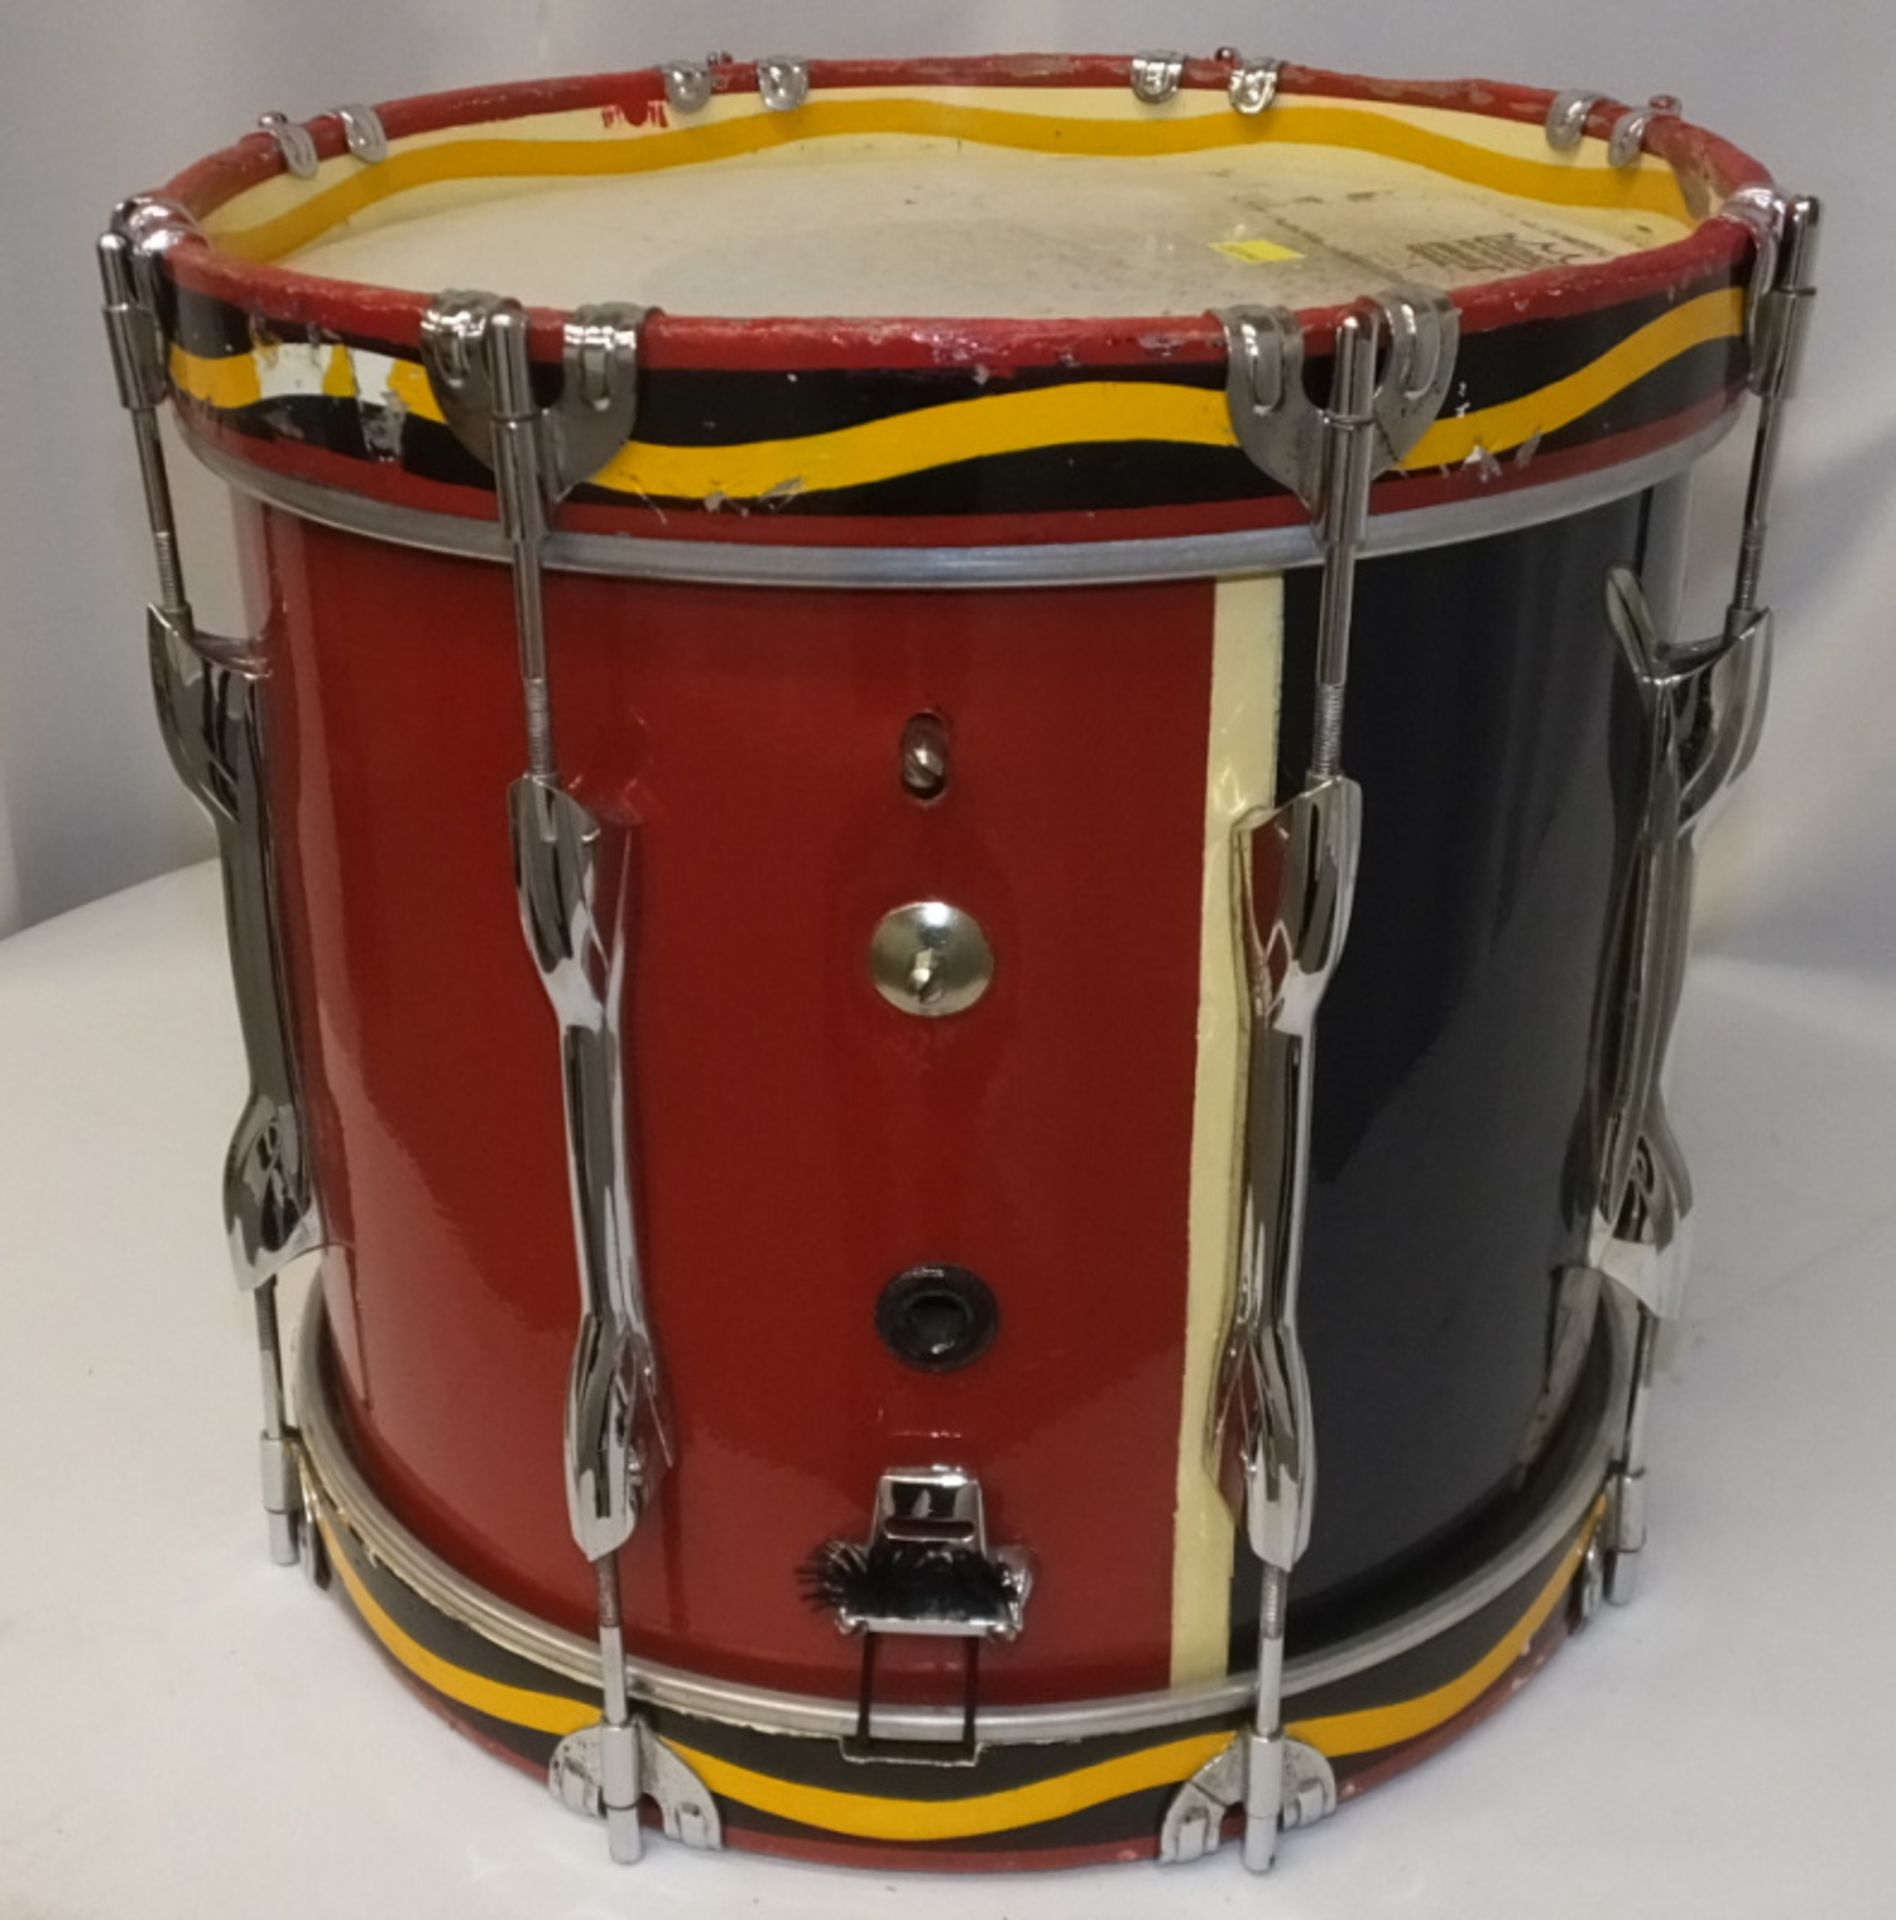 Premier Marching Snare Drum - 14 x 14 inch with Remo Emperor X head - Please check photos - Image 4 of 7